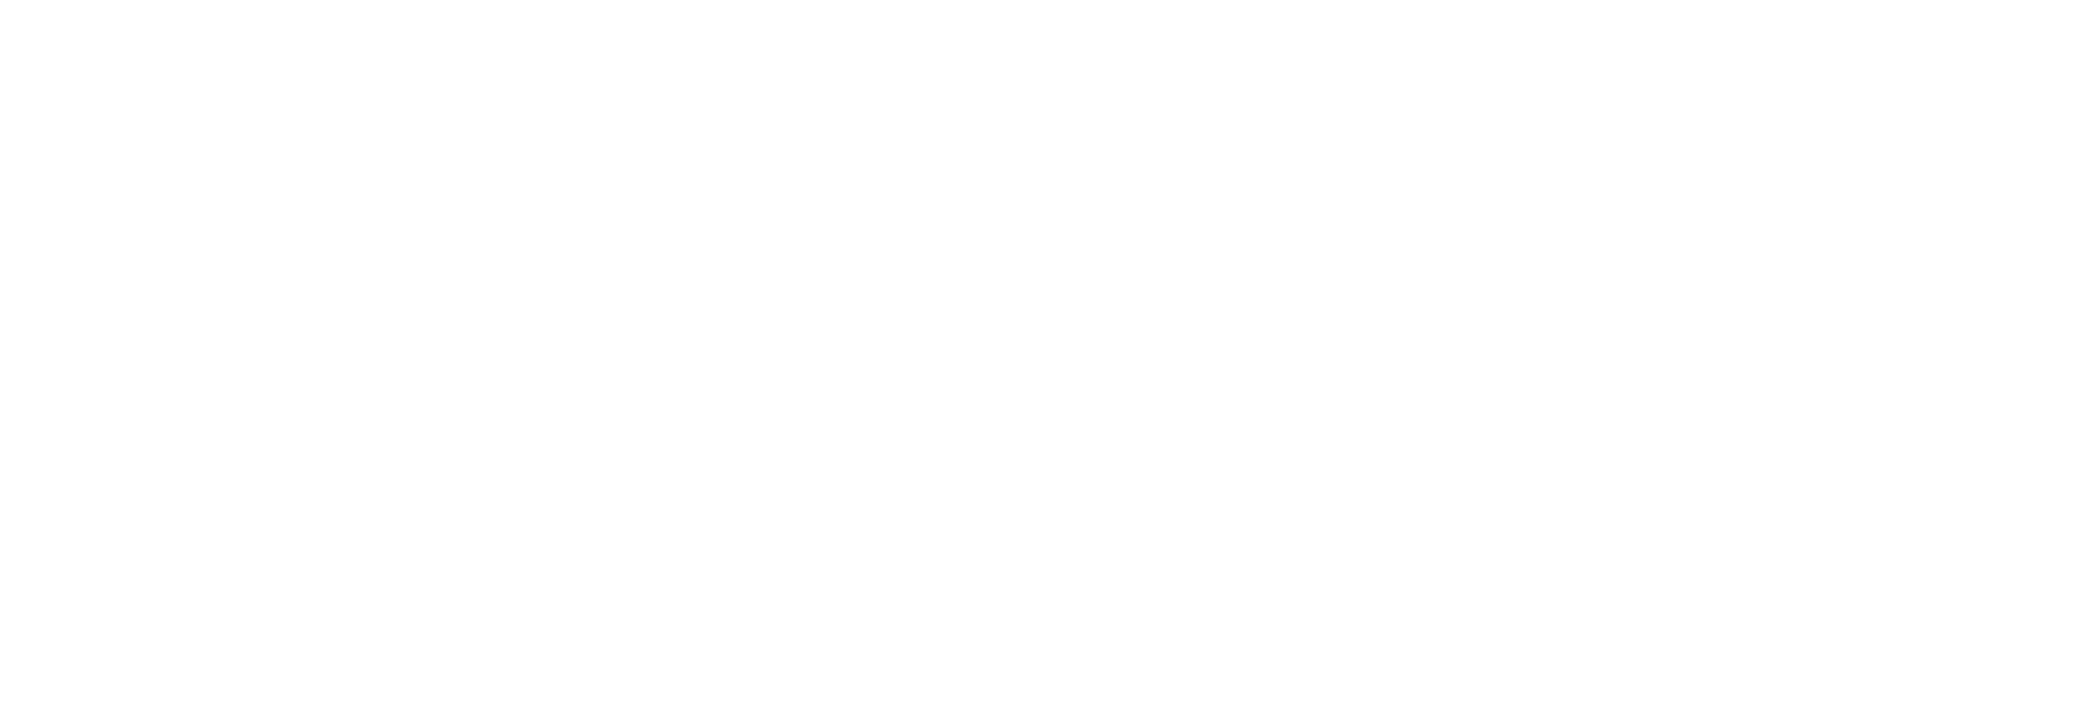 Footer Logo for First United Reformed Church